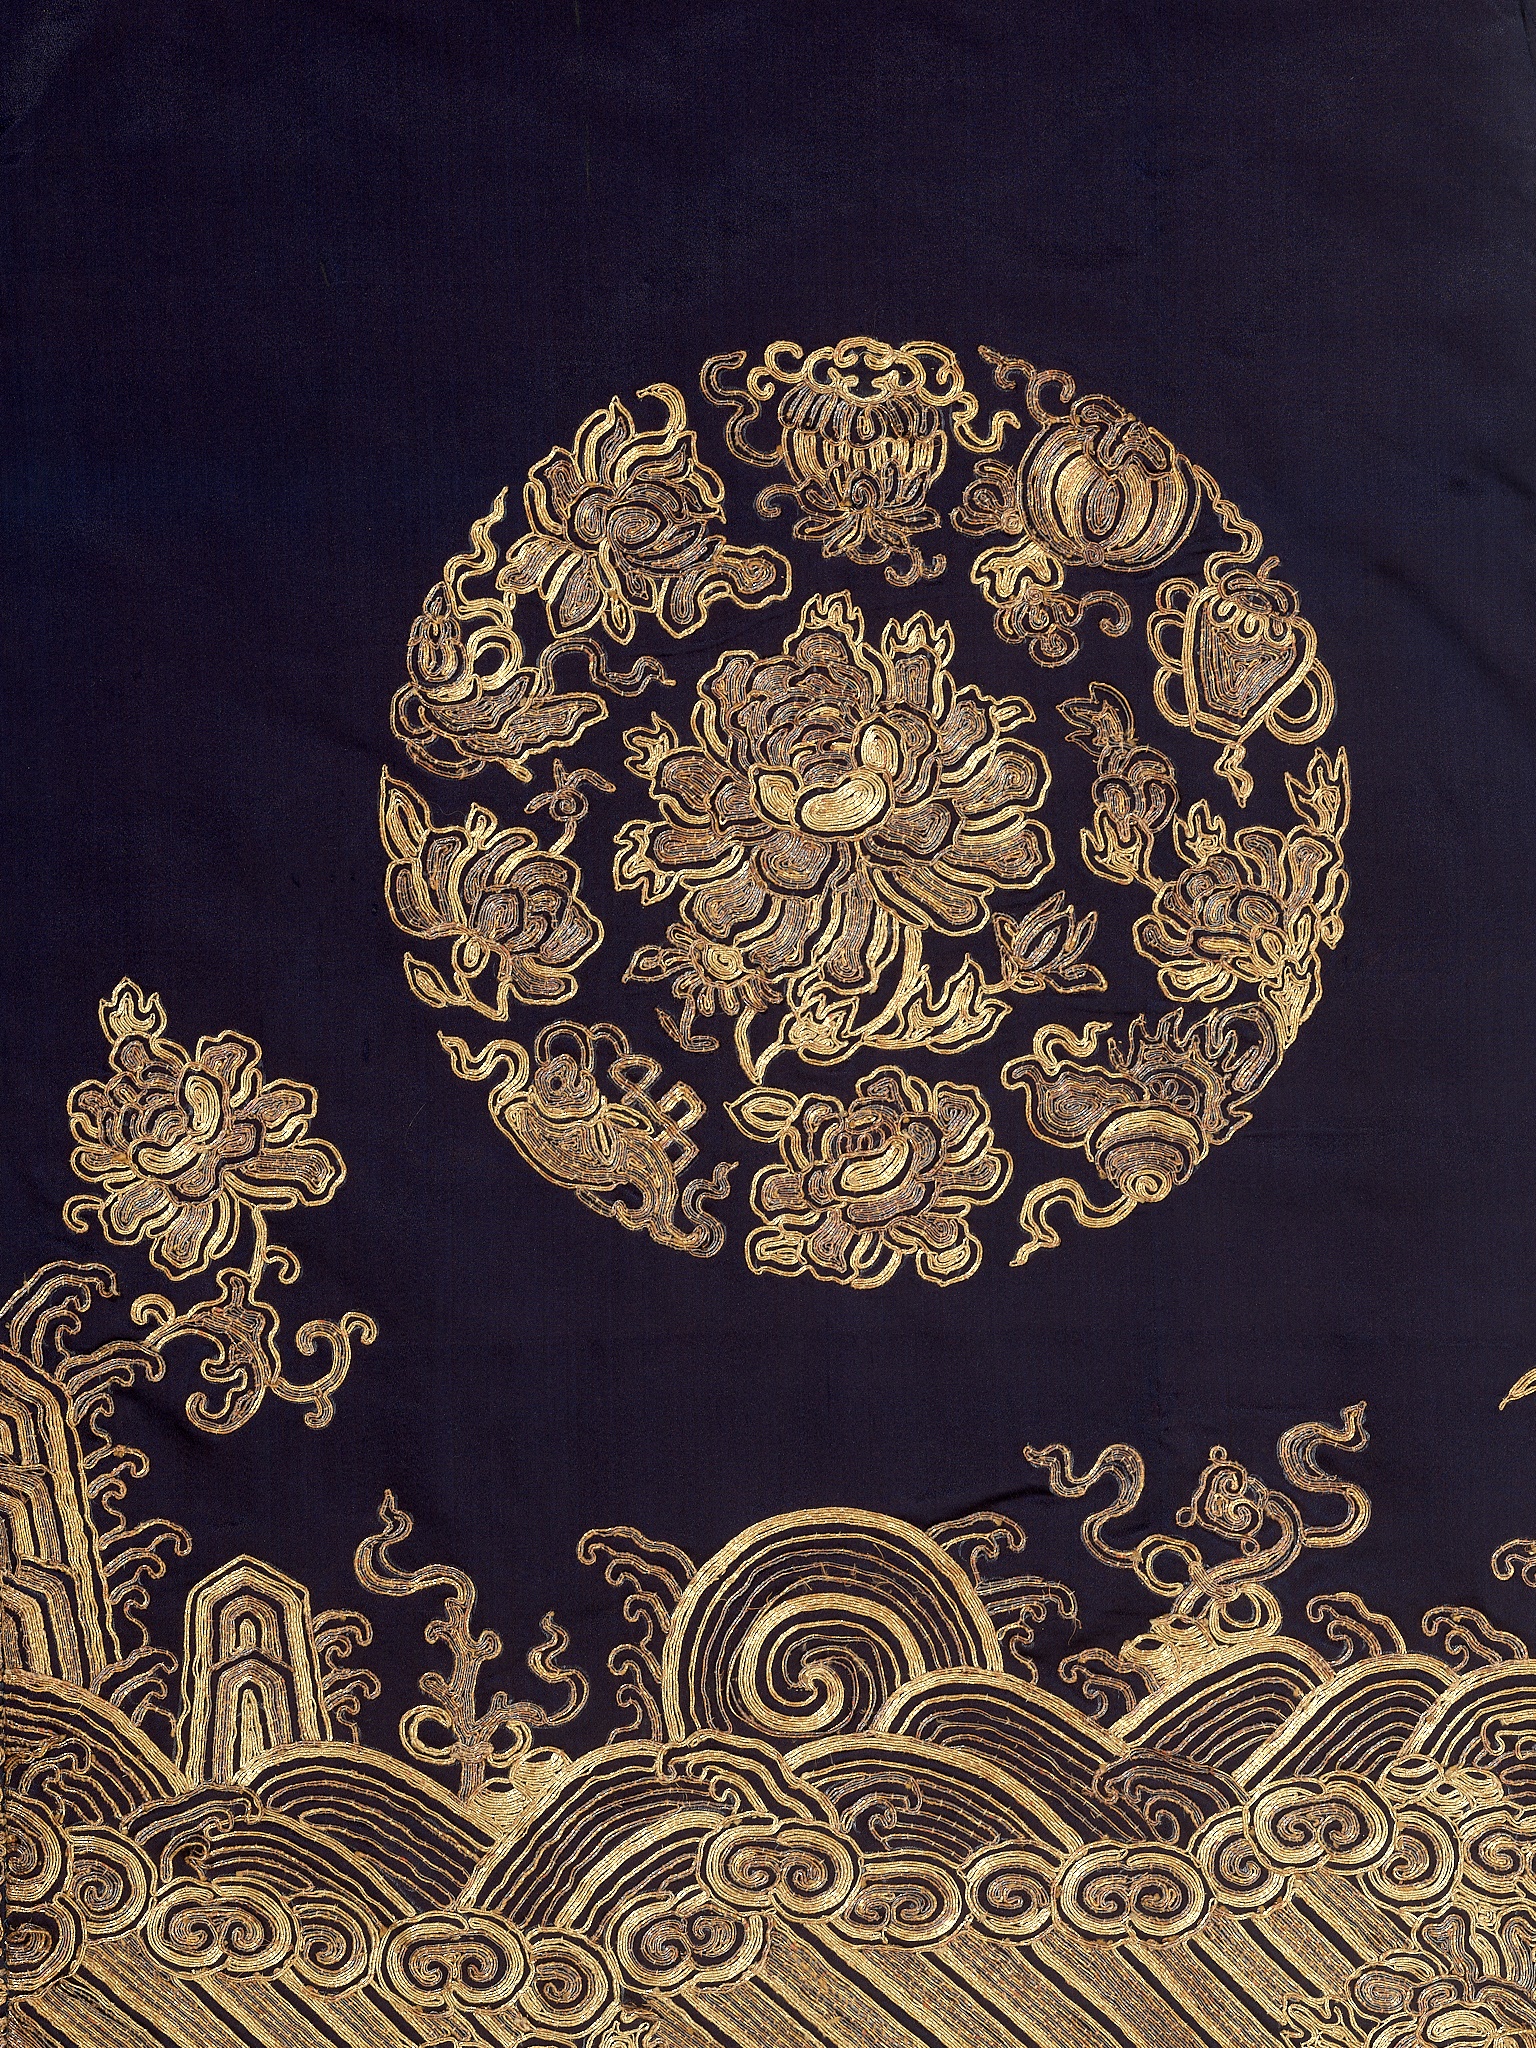 A WOMAN'S SILVER AND GOLD-EMBROIDERED SILK ROUNDEL ROBE, 19TH CENTURY - Image 11 of 14